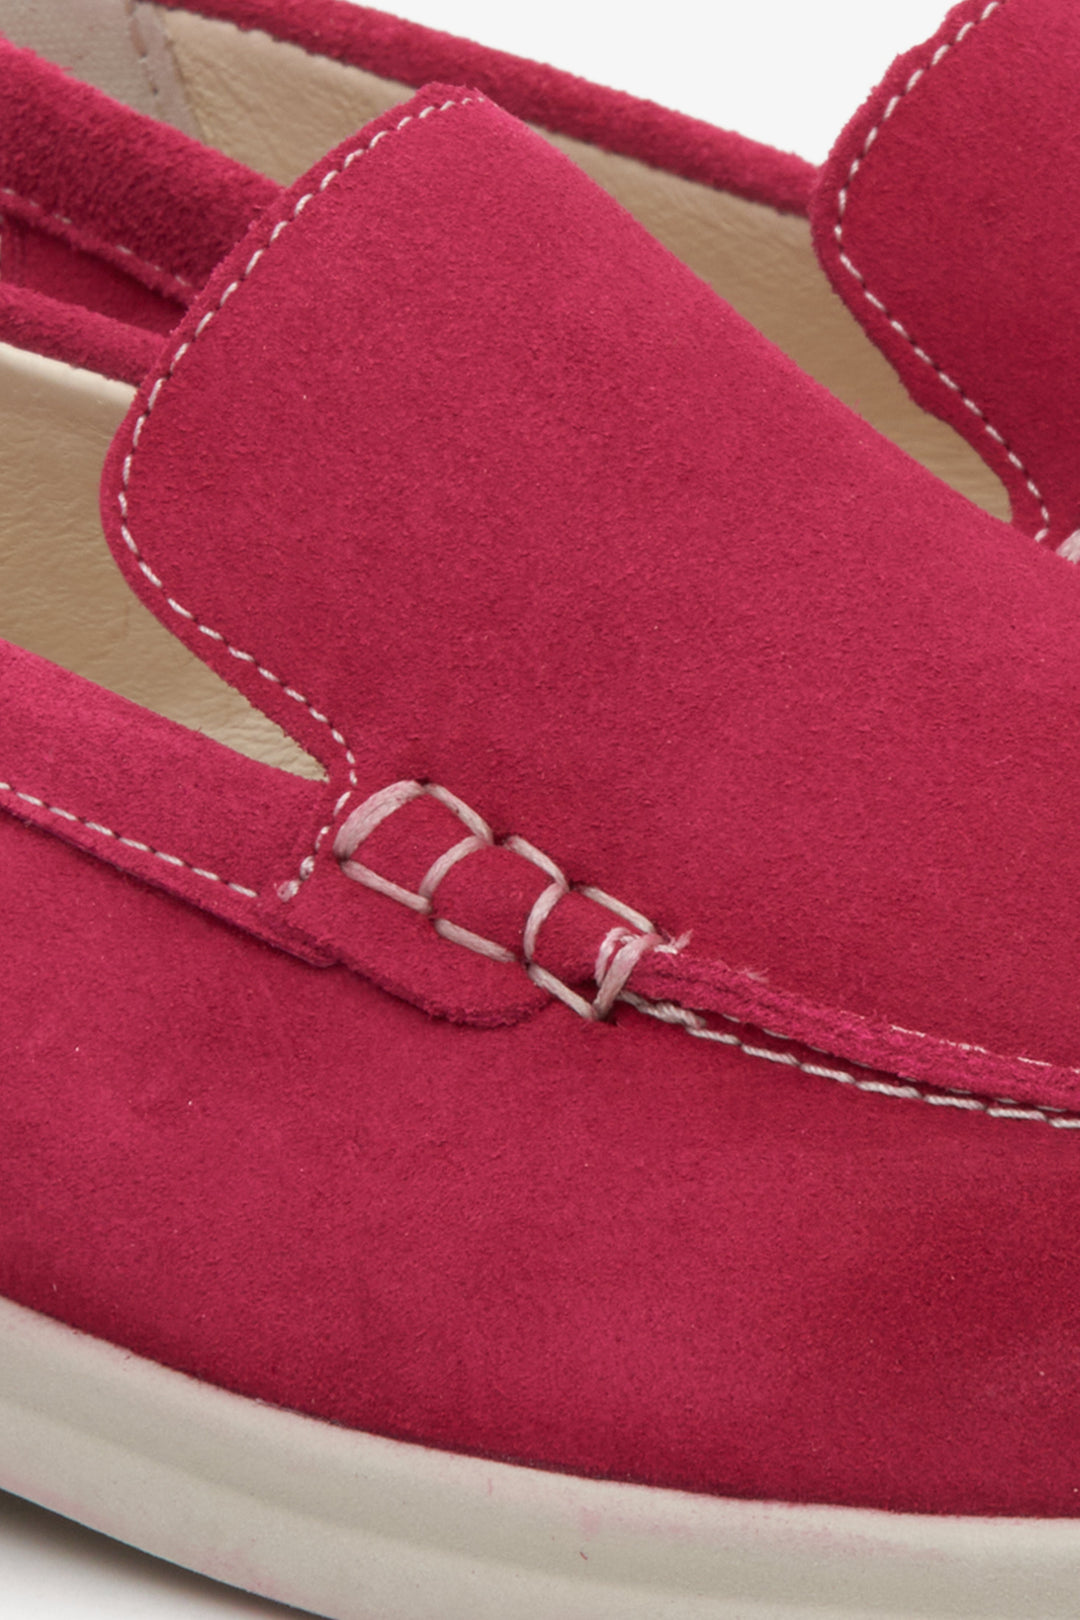 Women's pink suede Estro moccasins - close-up of the sewing system.